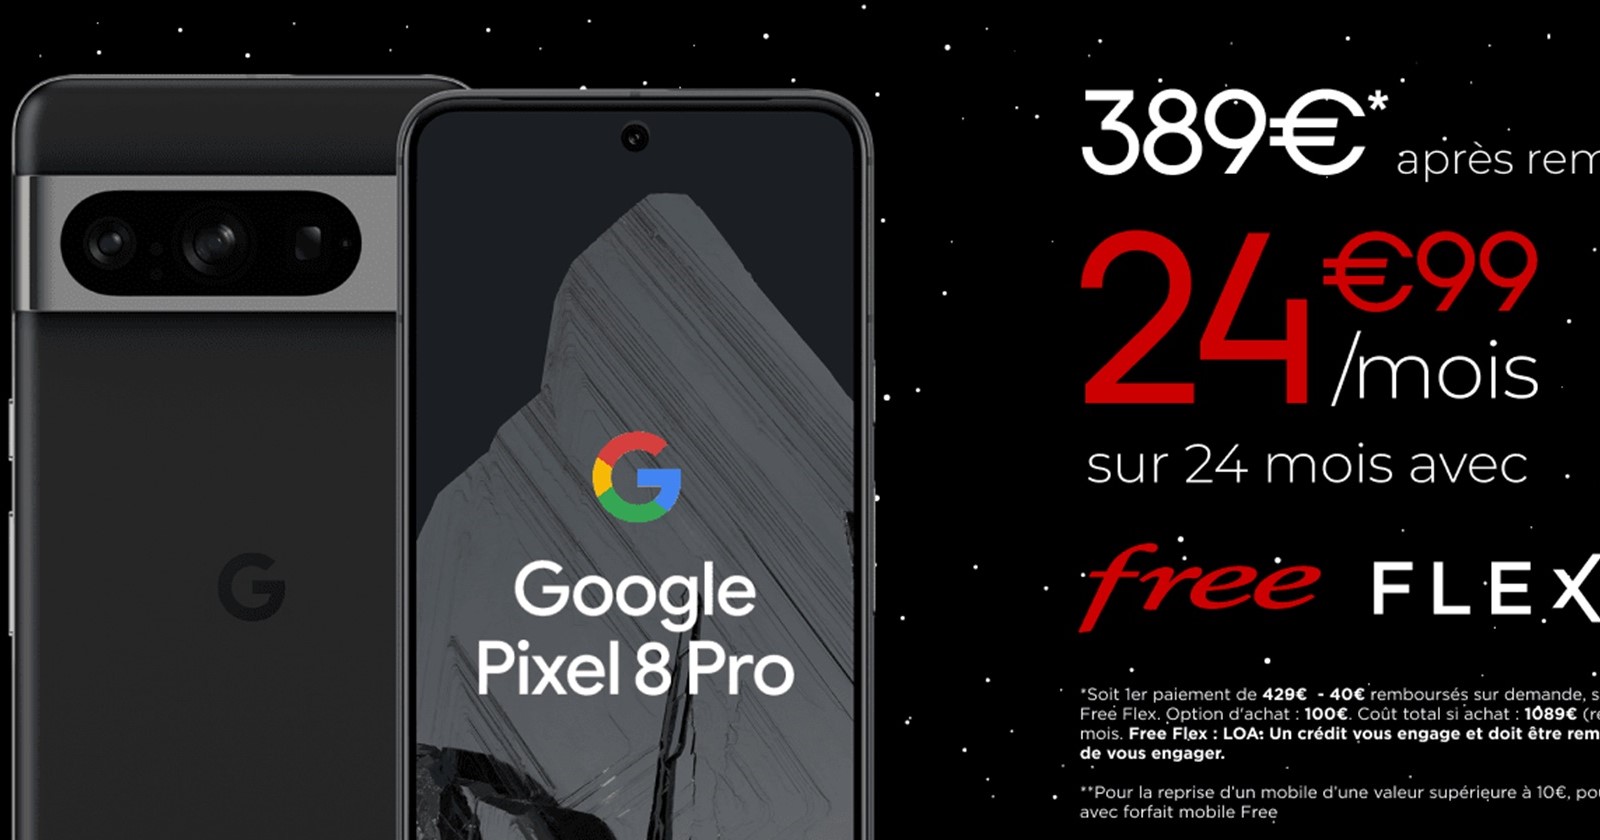 Google Pixel 8 availability in Europe expands to one more carrier